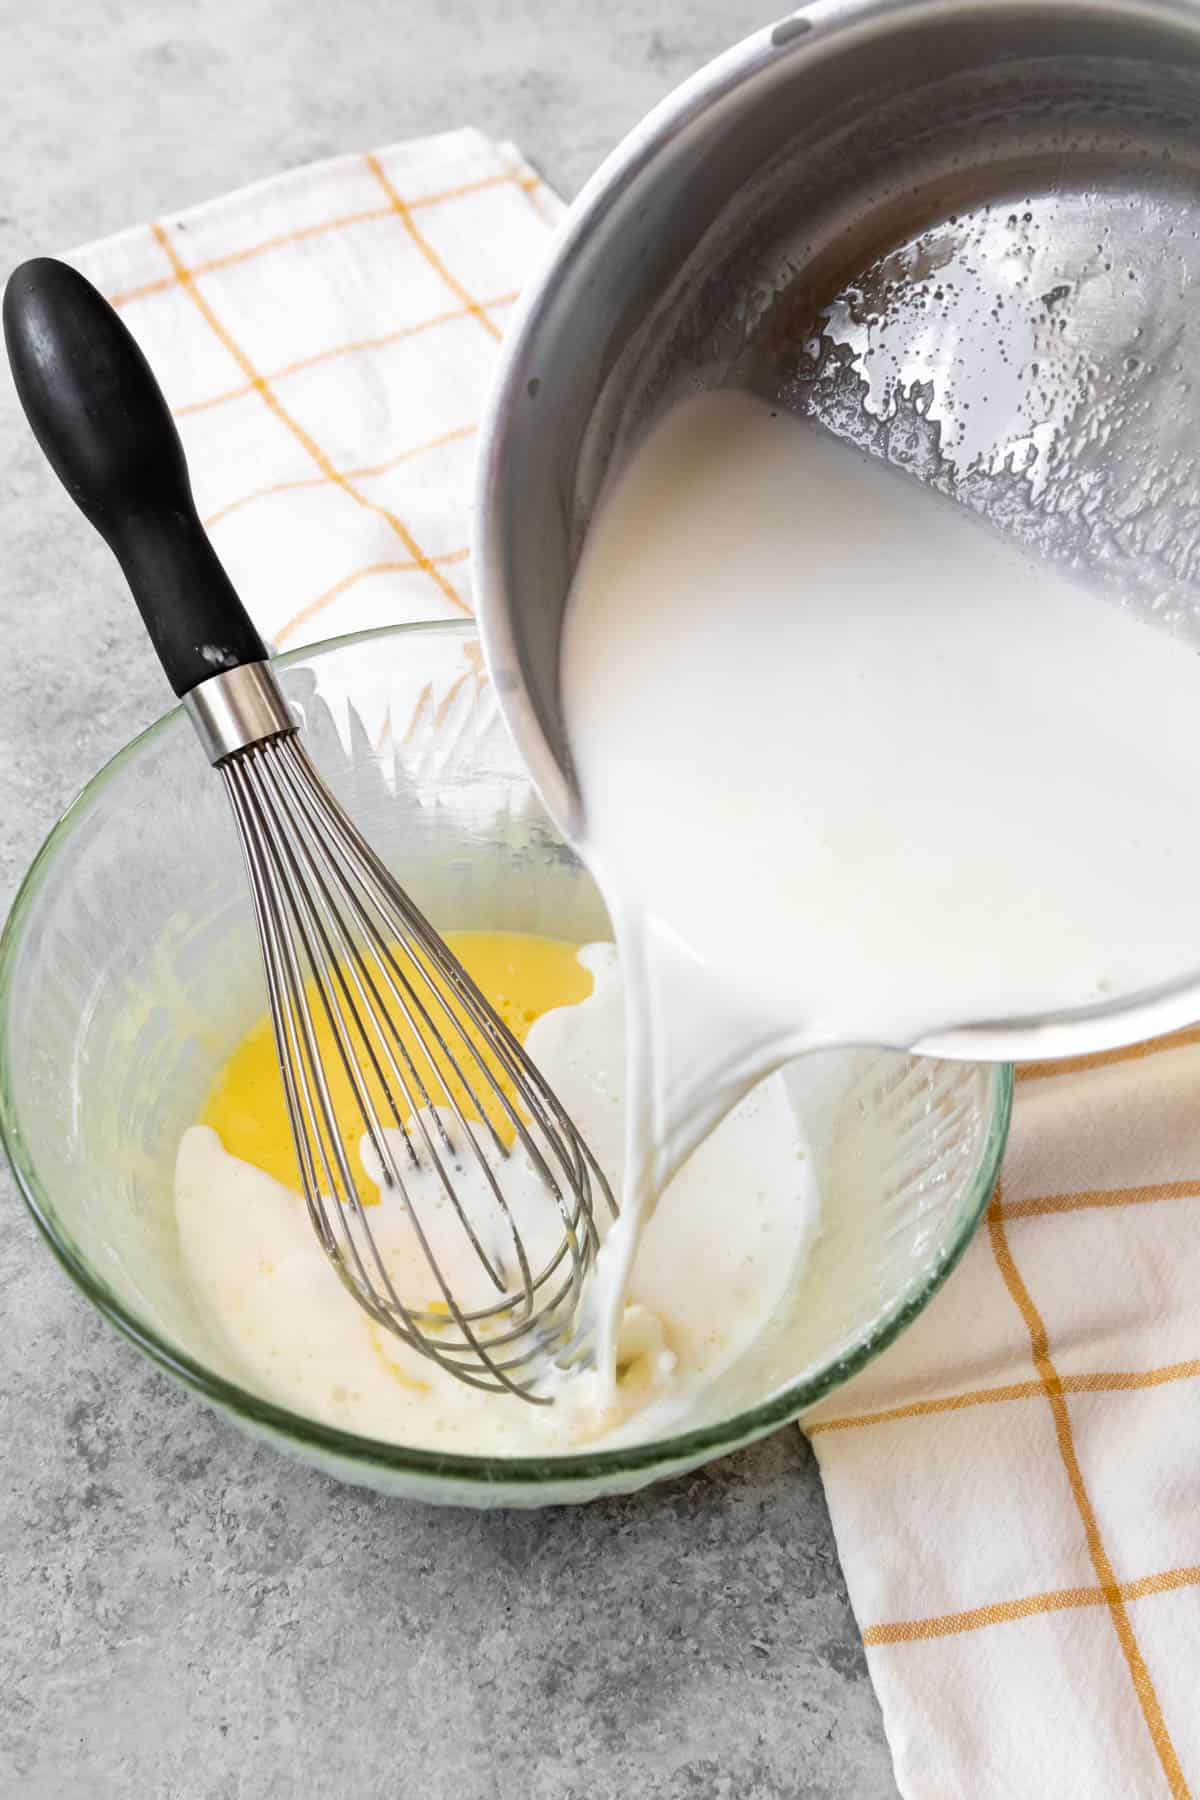 Adding hot milk to egg yolks in a glass bowl.